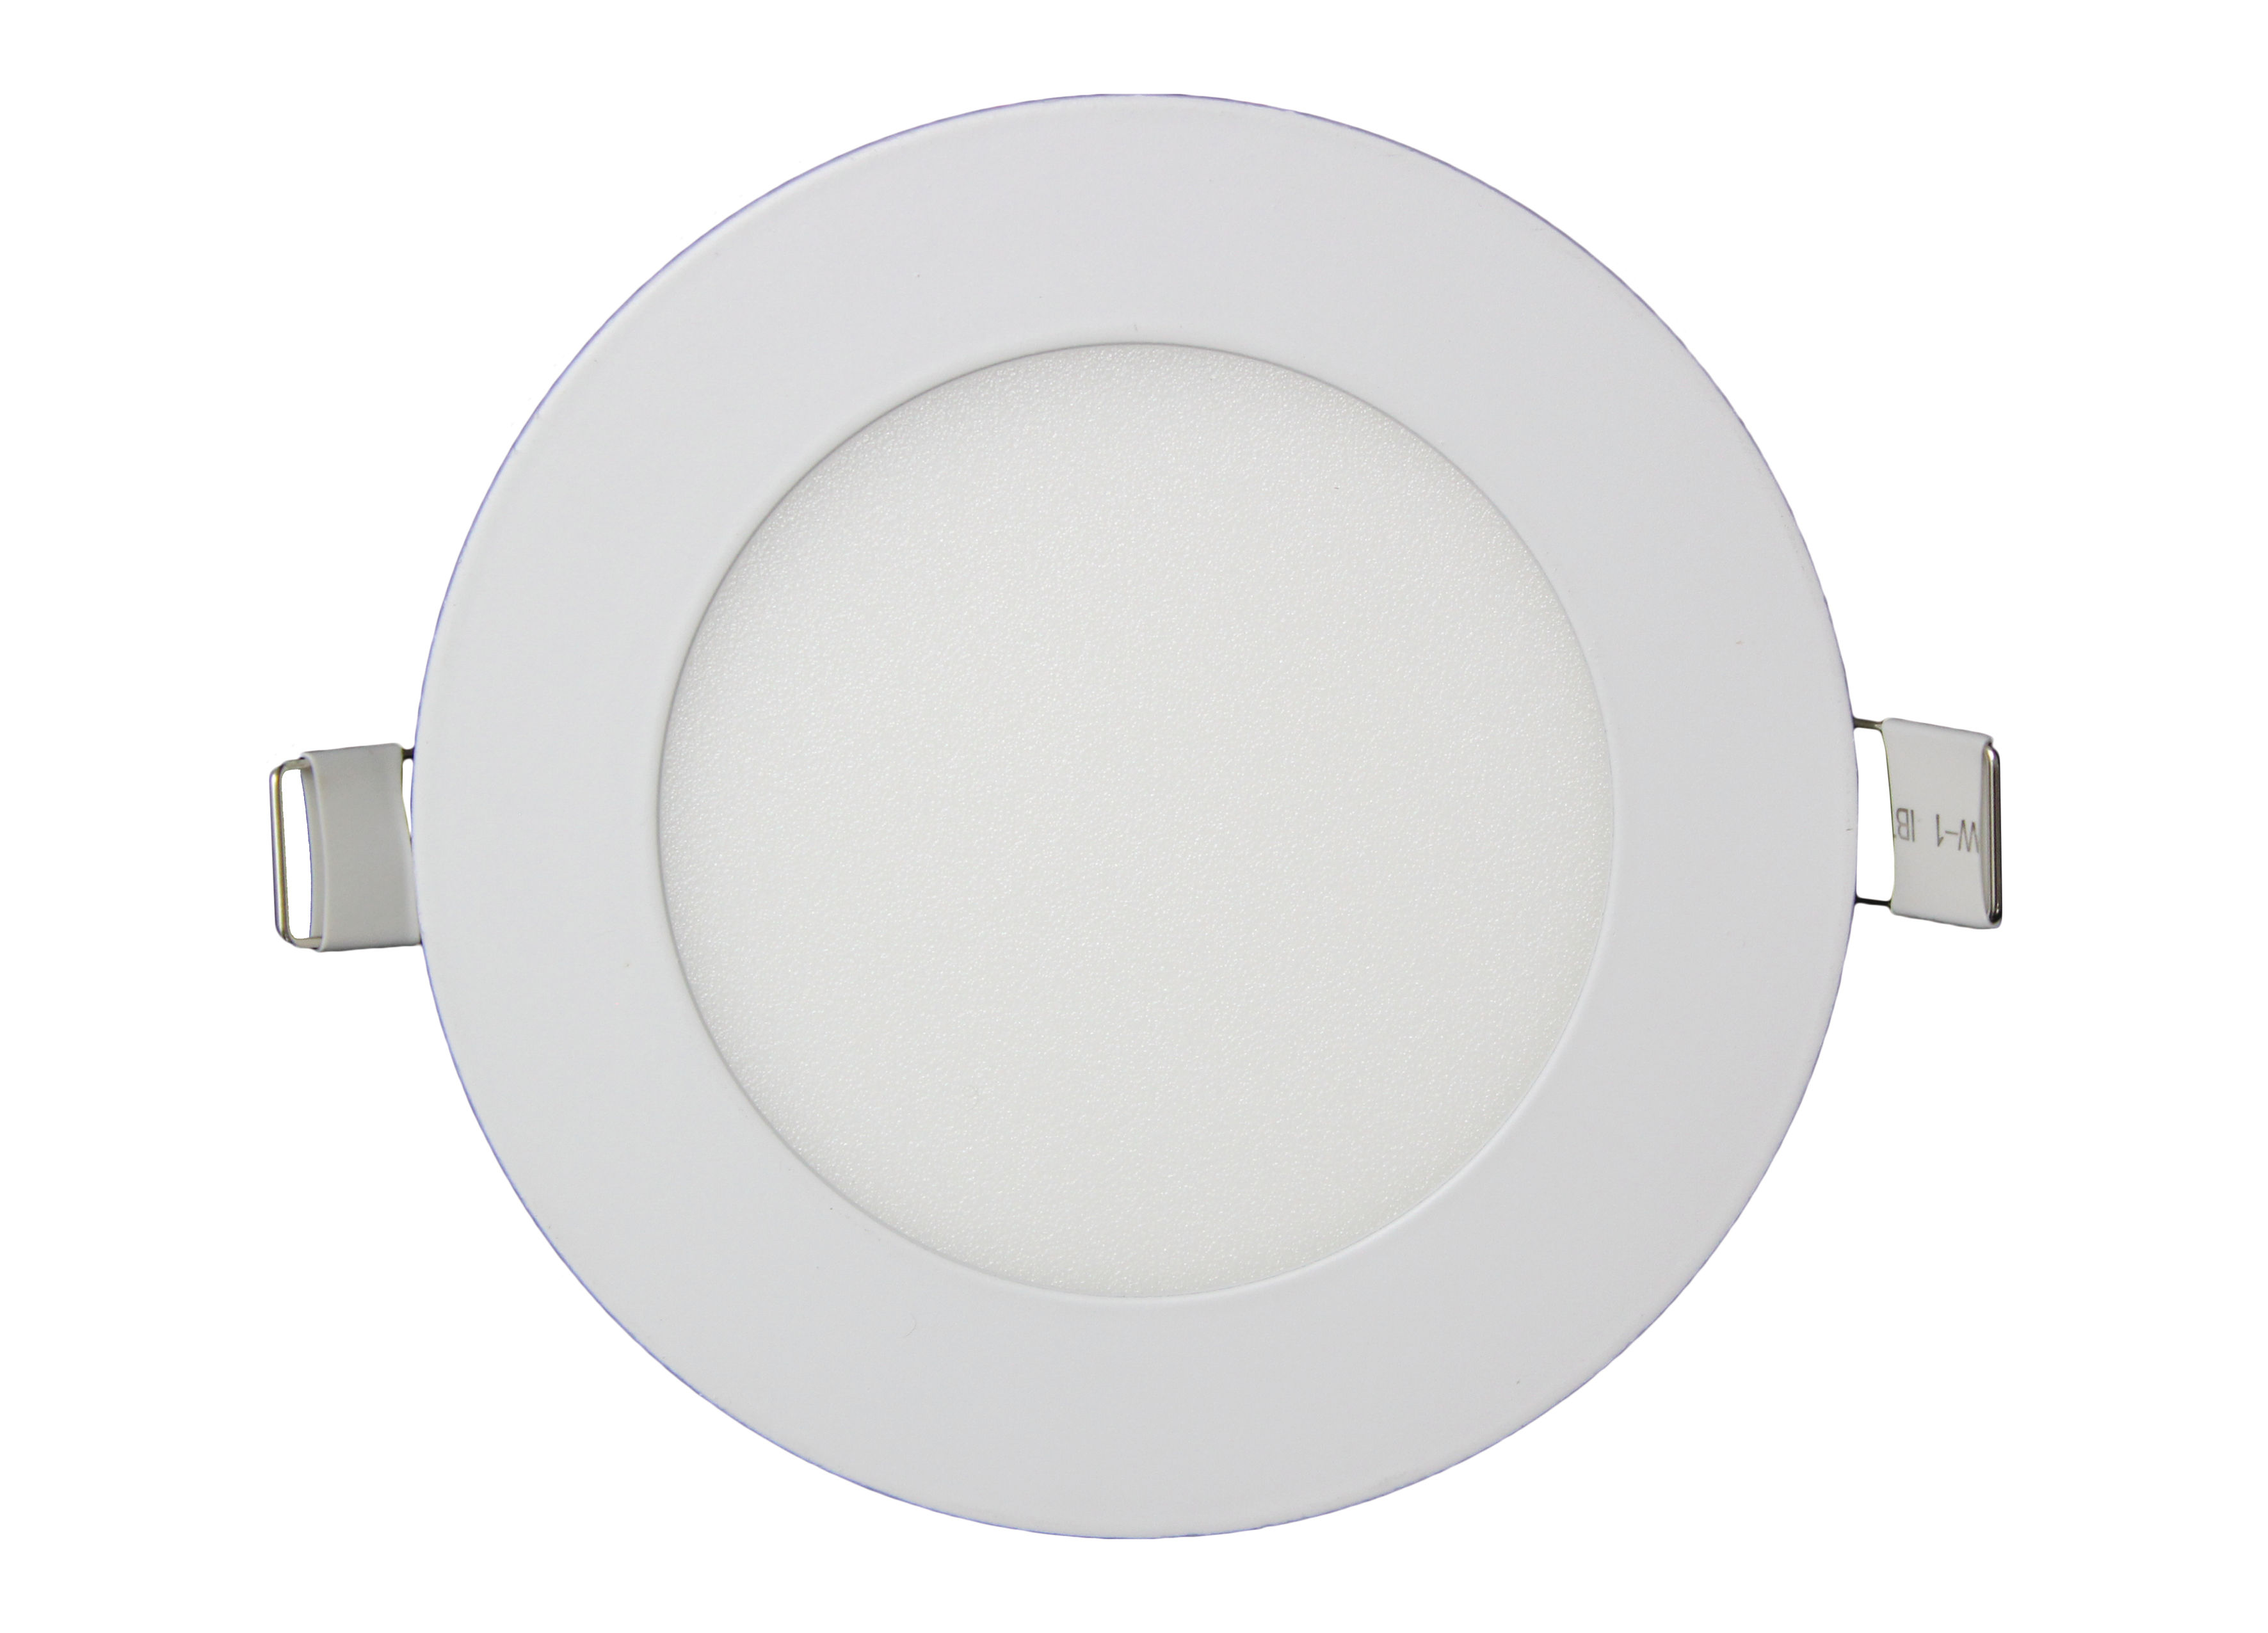 21W Non-Dimmable LED Cool White Panel Light (D2W-21C) - VETi